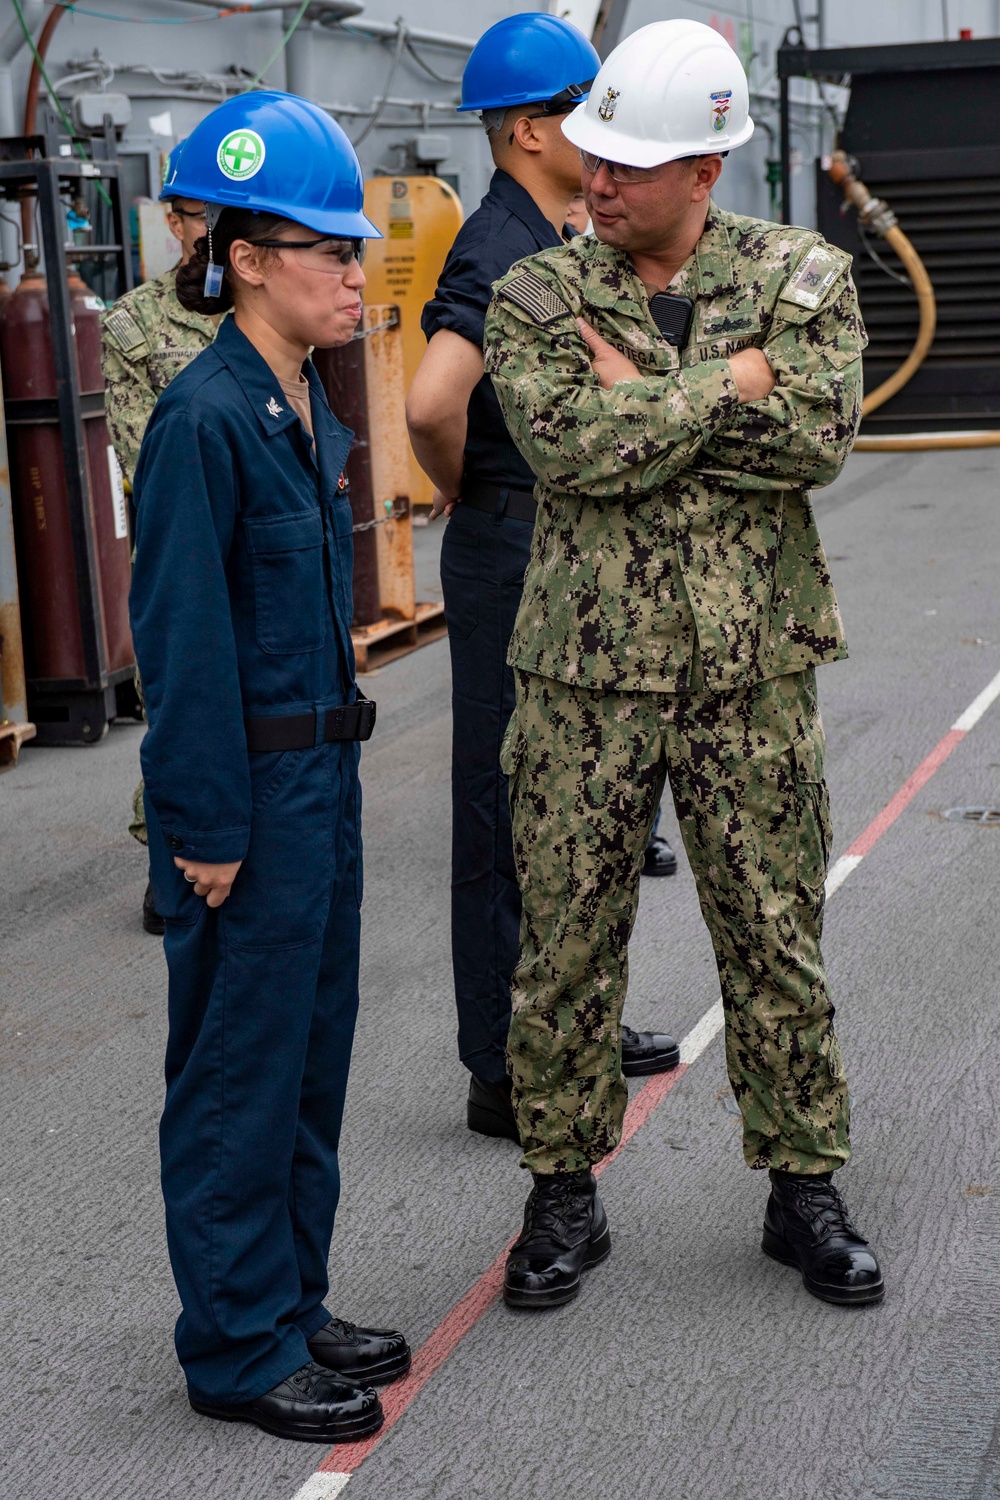 USS Essex Sailors Compete in a Boot Shining Competition